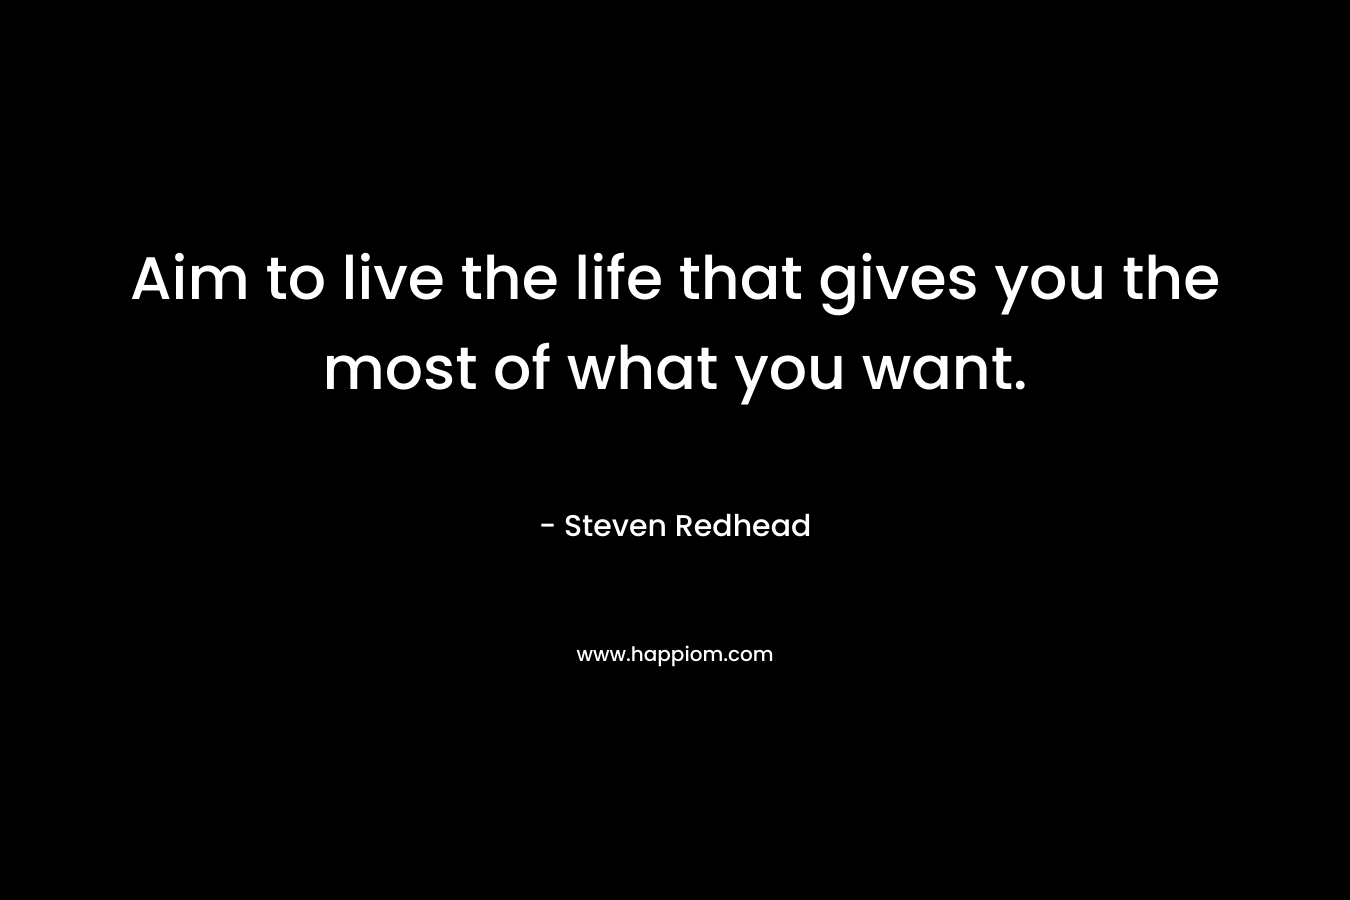 Aim to live the life that gives you the most of what you want.